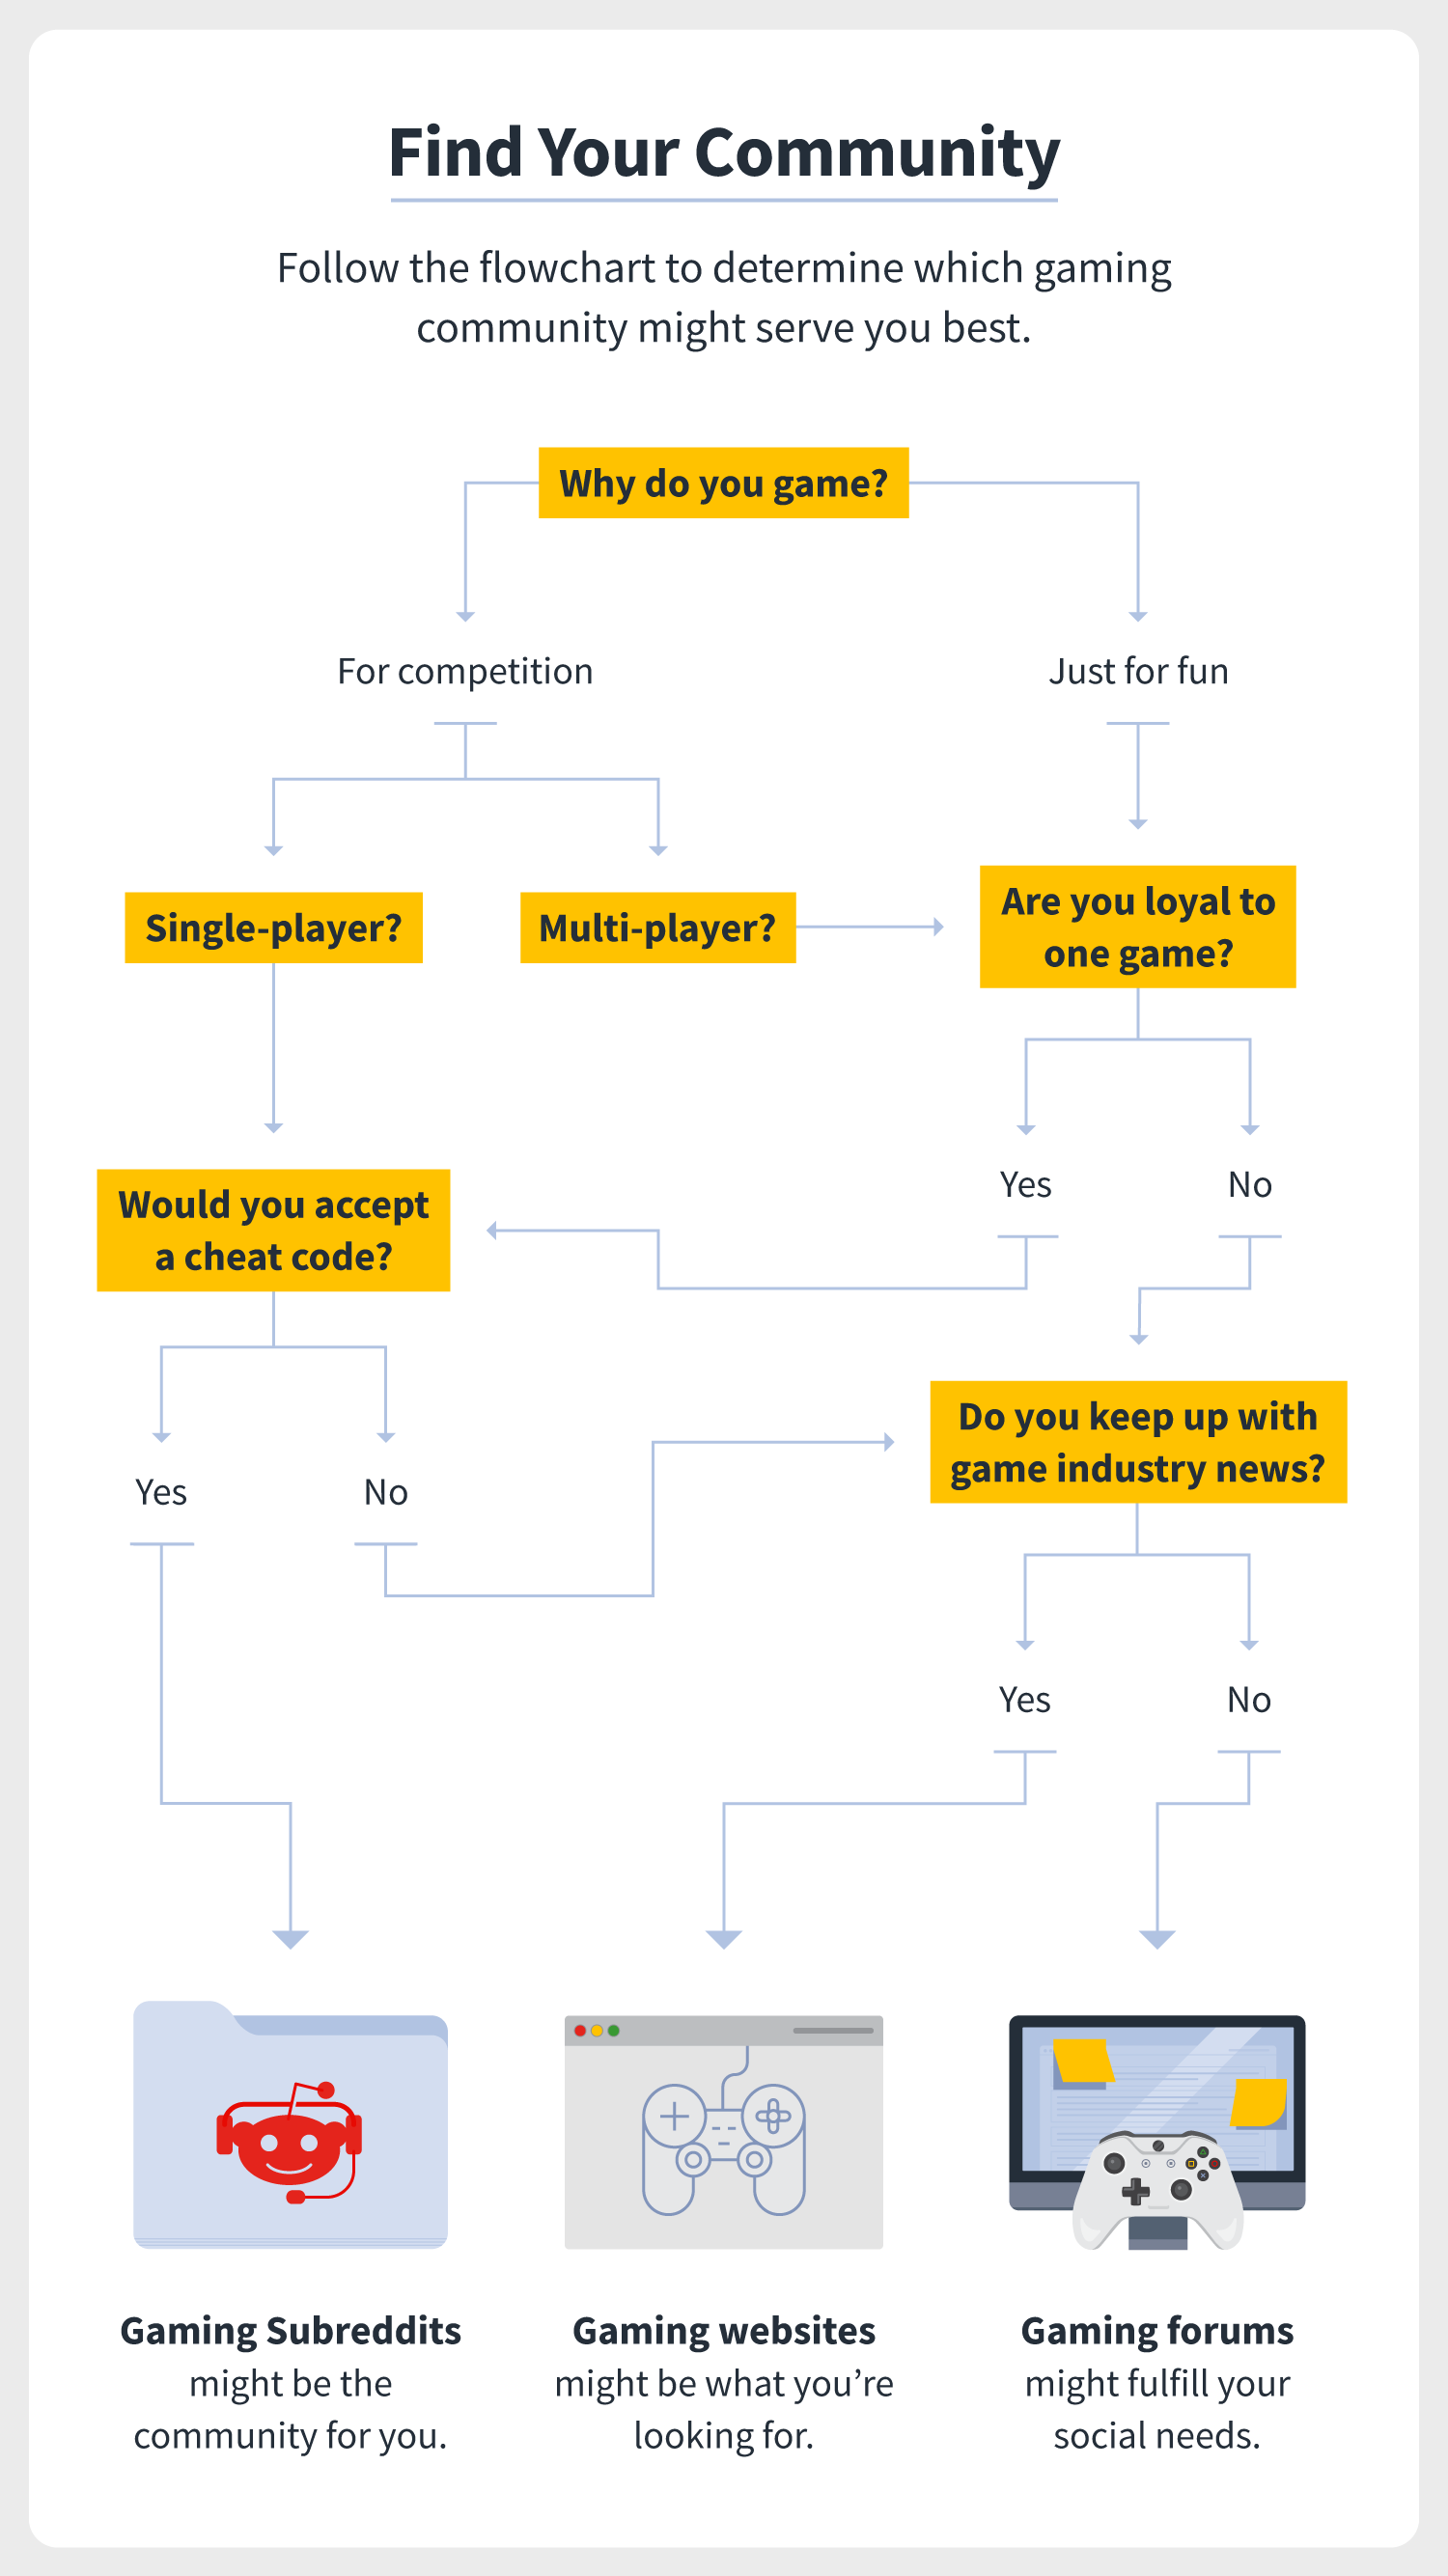 follow this flowchart to determine which gaming community is right for you — gaming Subreddits, gaming websites, or gaming forums.